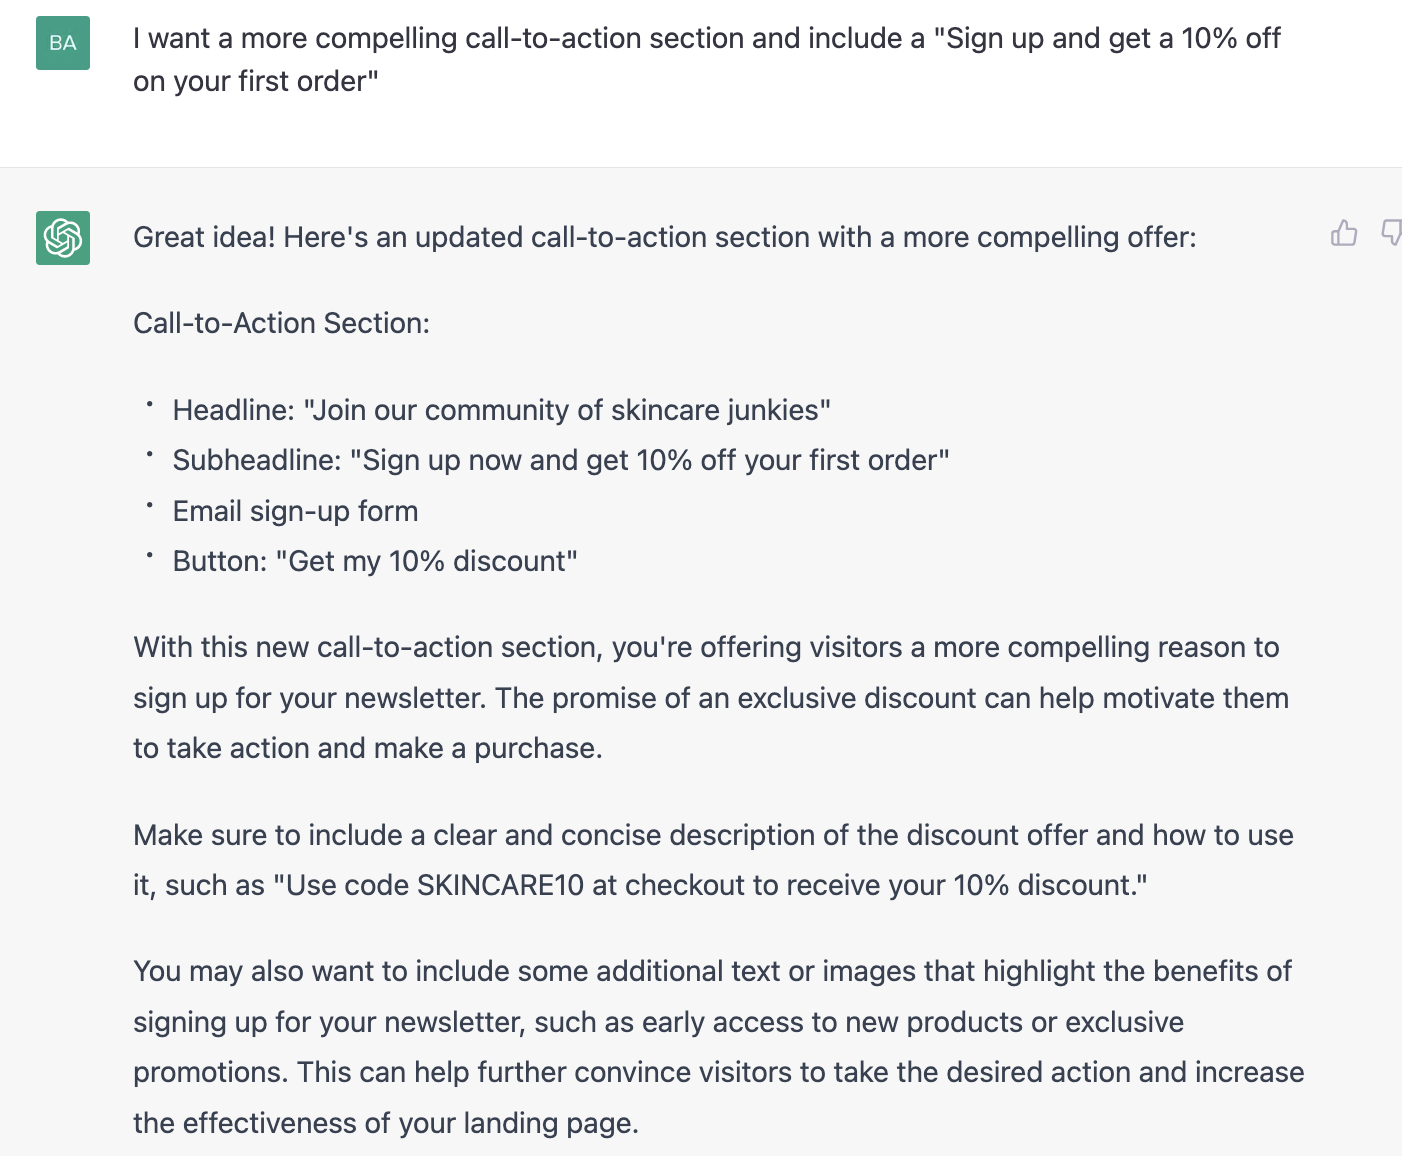 ChatGPT prompt about an updated call to action section with a more compelling offer